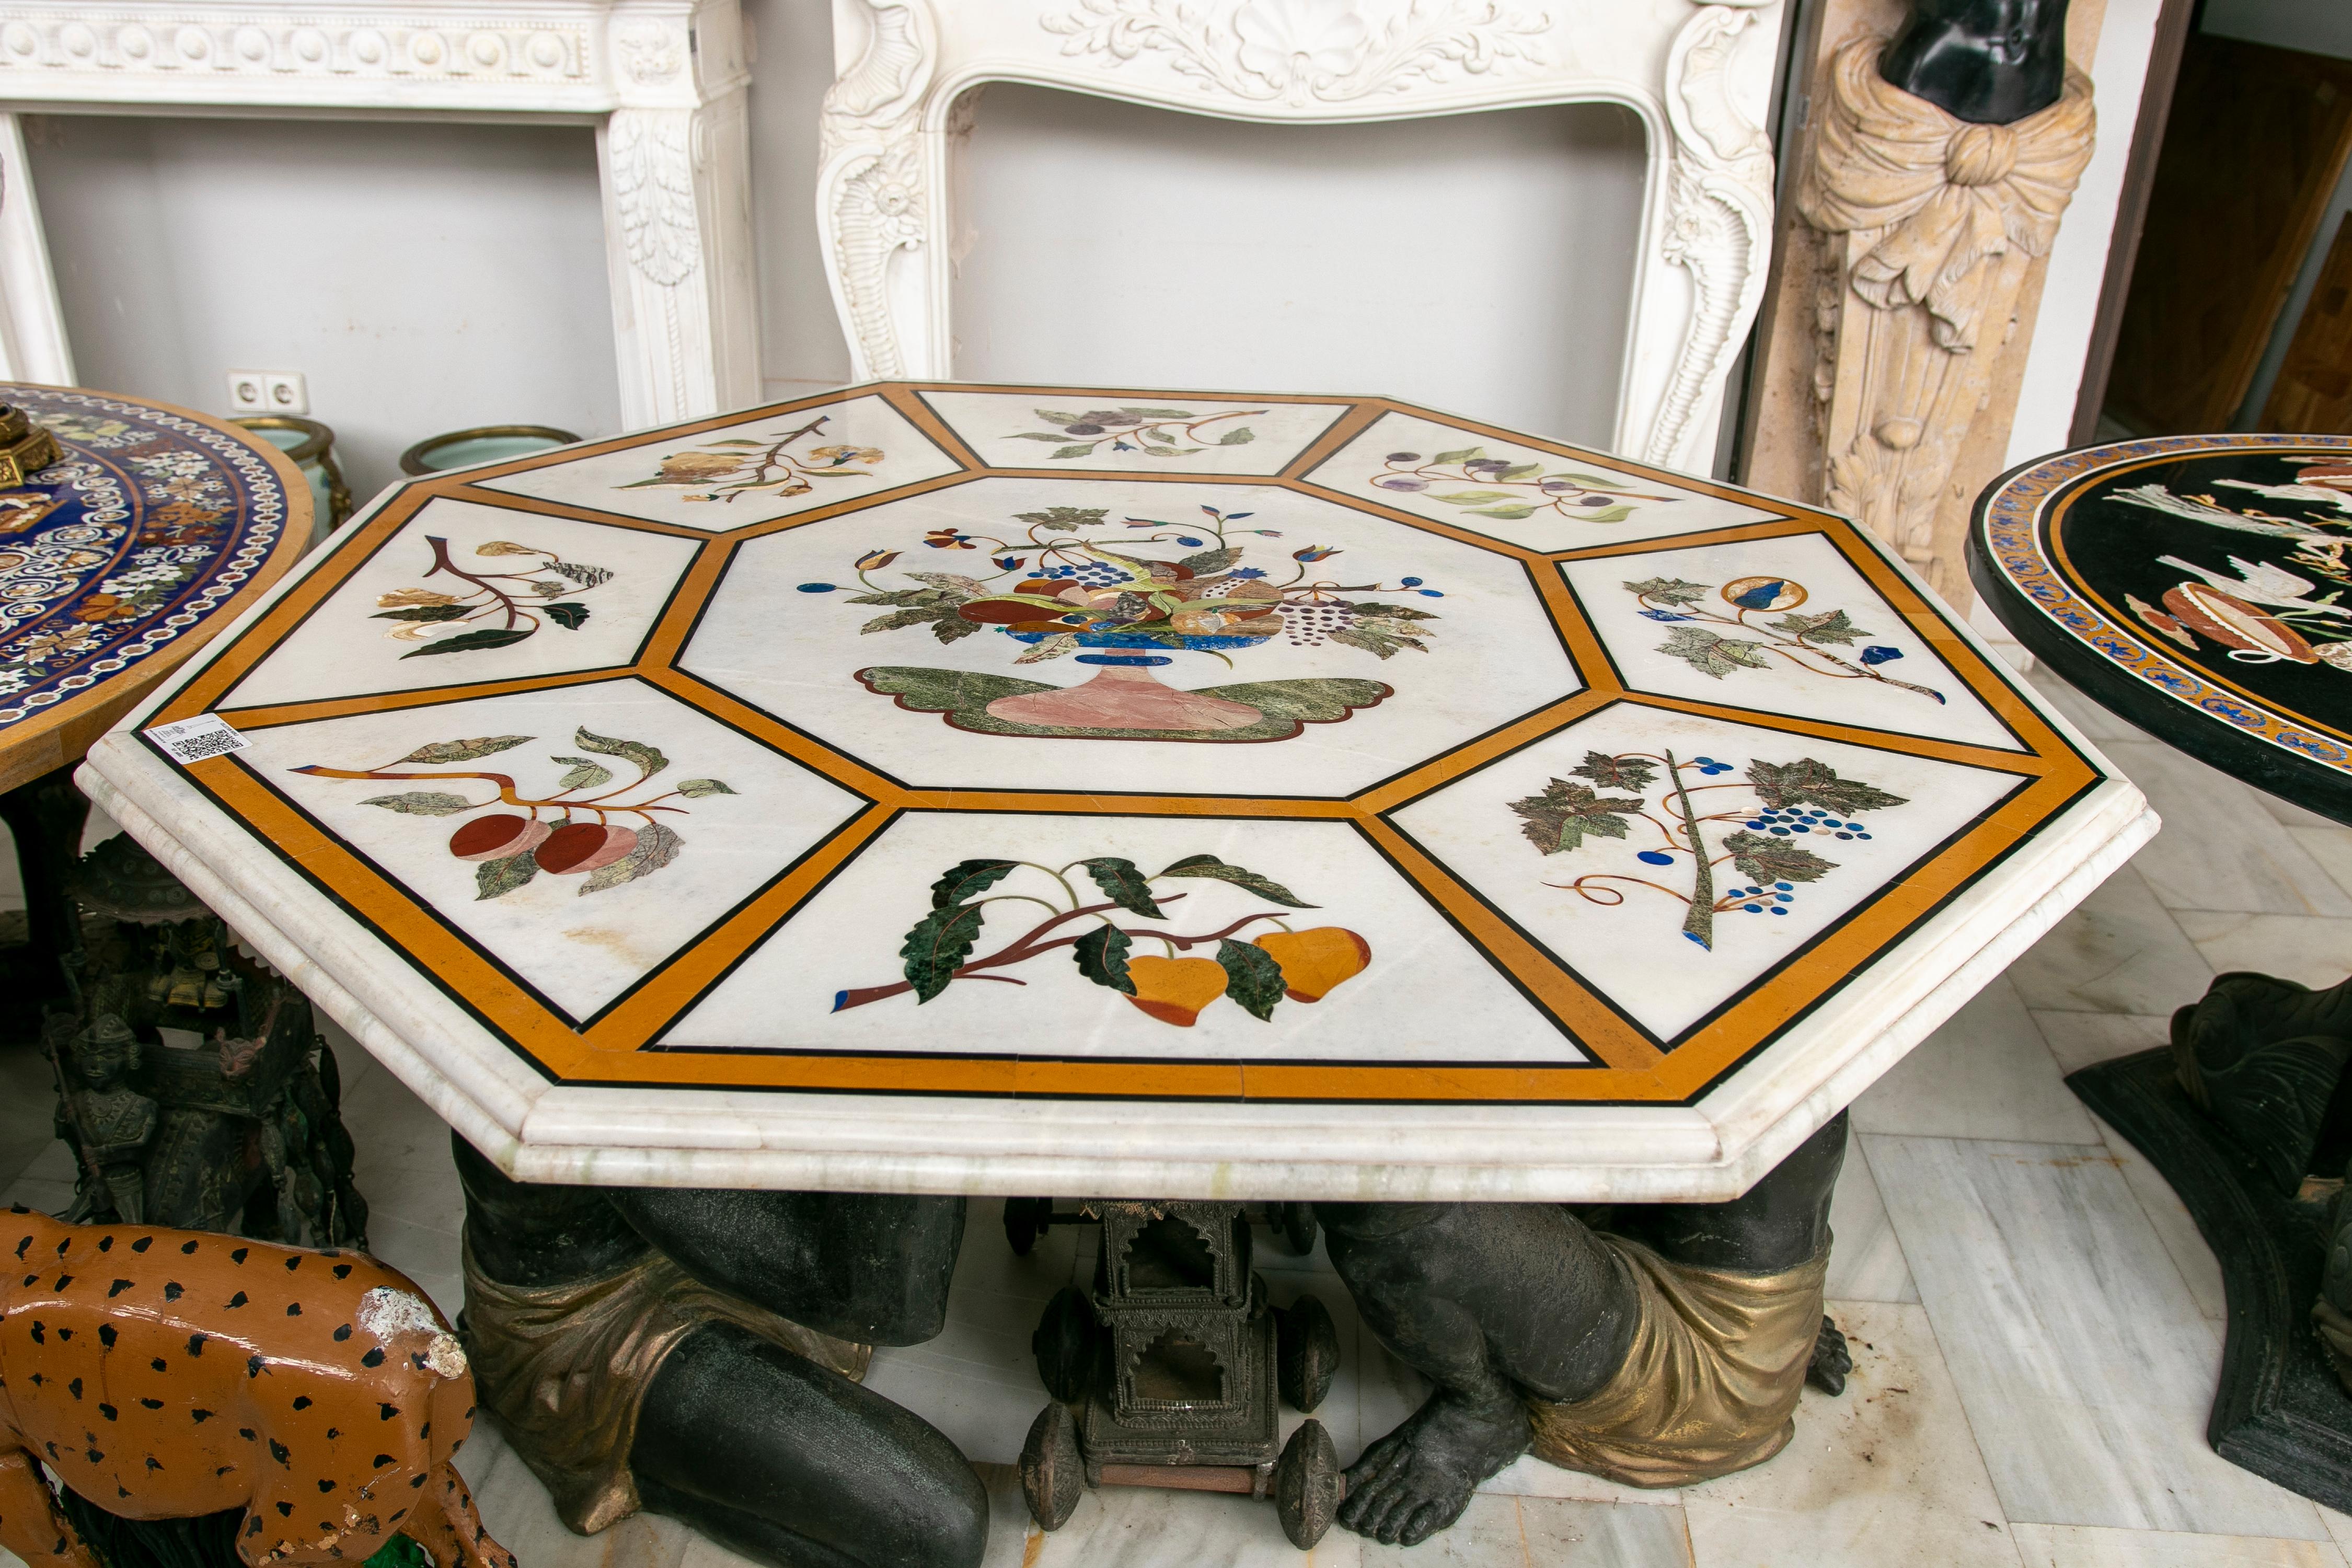 Octagonal White Marble Table with Inlaid White Marble with Flower Decoration.